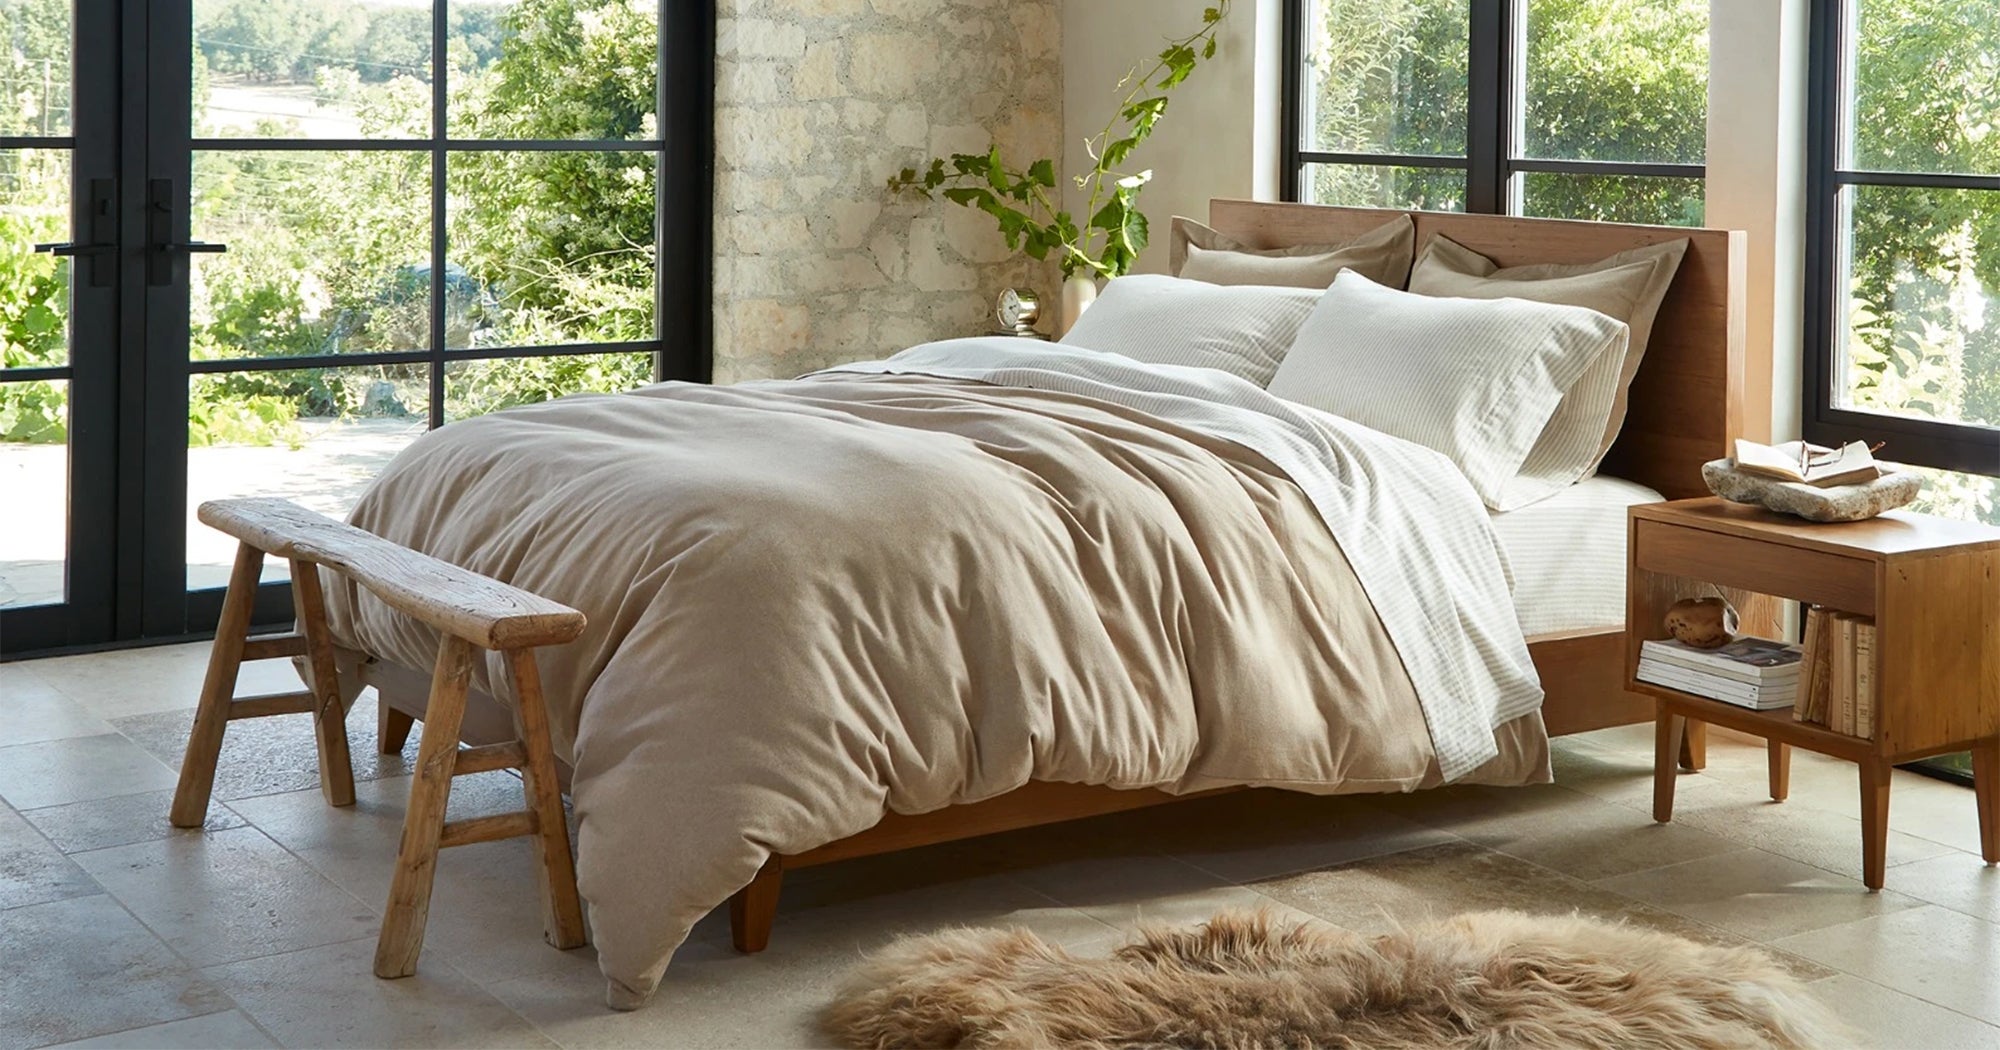 From Sustainable To Affordable, The Internet’s Best Duvet Covers Are Always Cozy